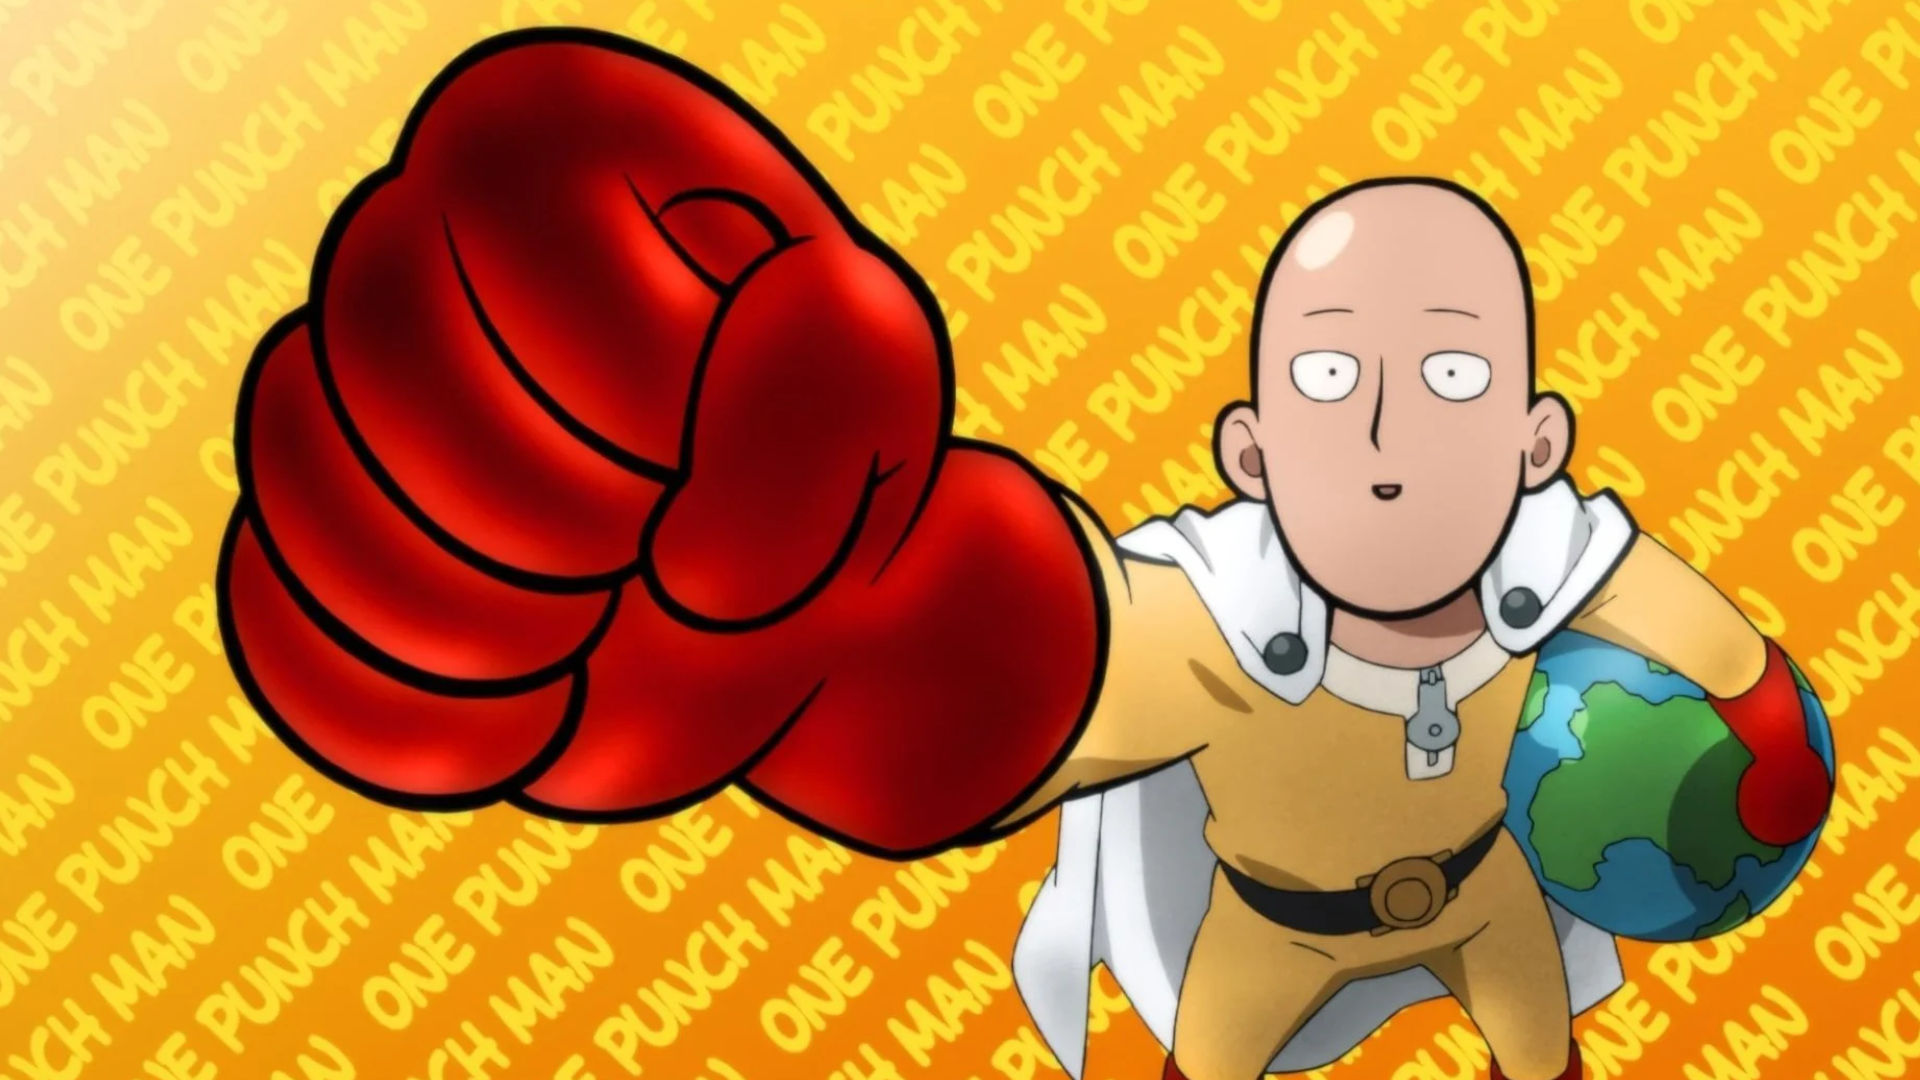 🔥The best card mobile game - One Punch Man: The Strongest